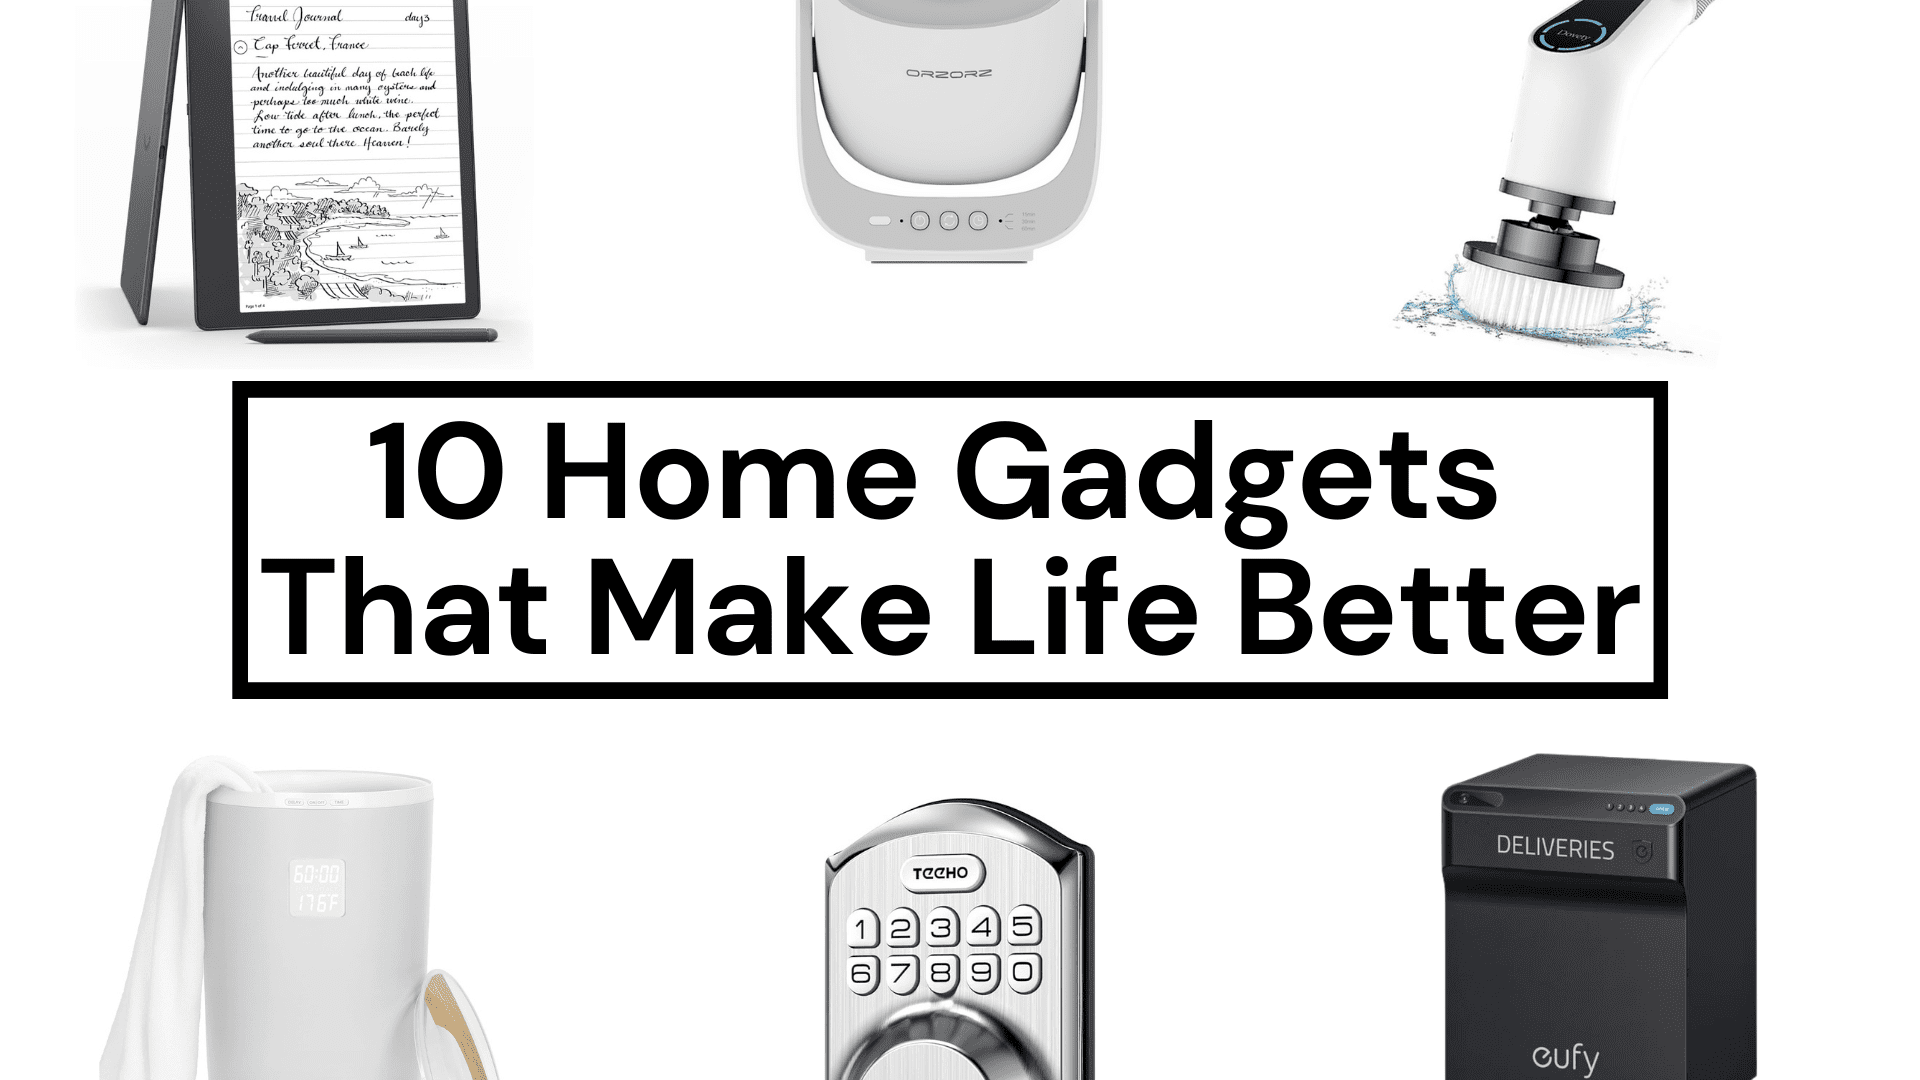 10 Home Gadgets That Make Life Better